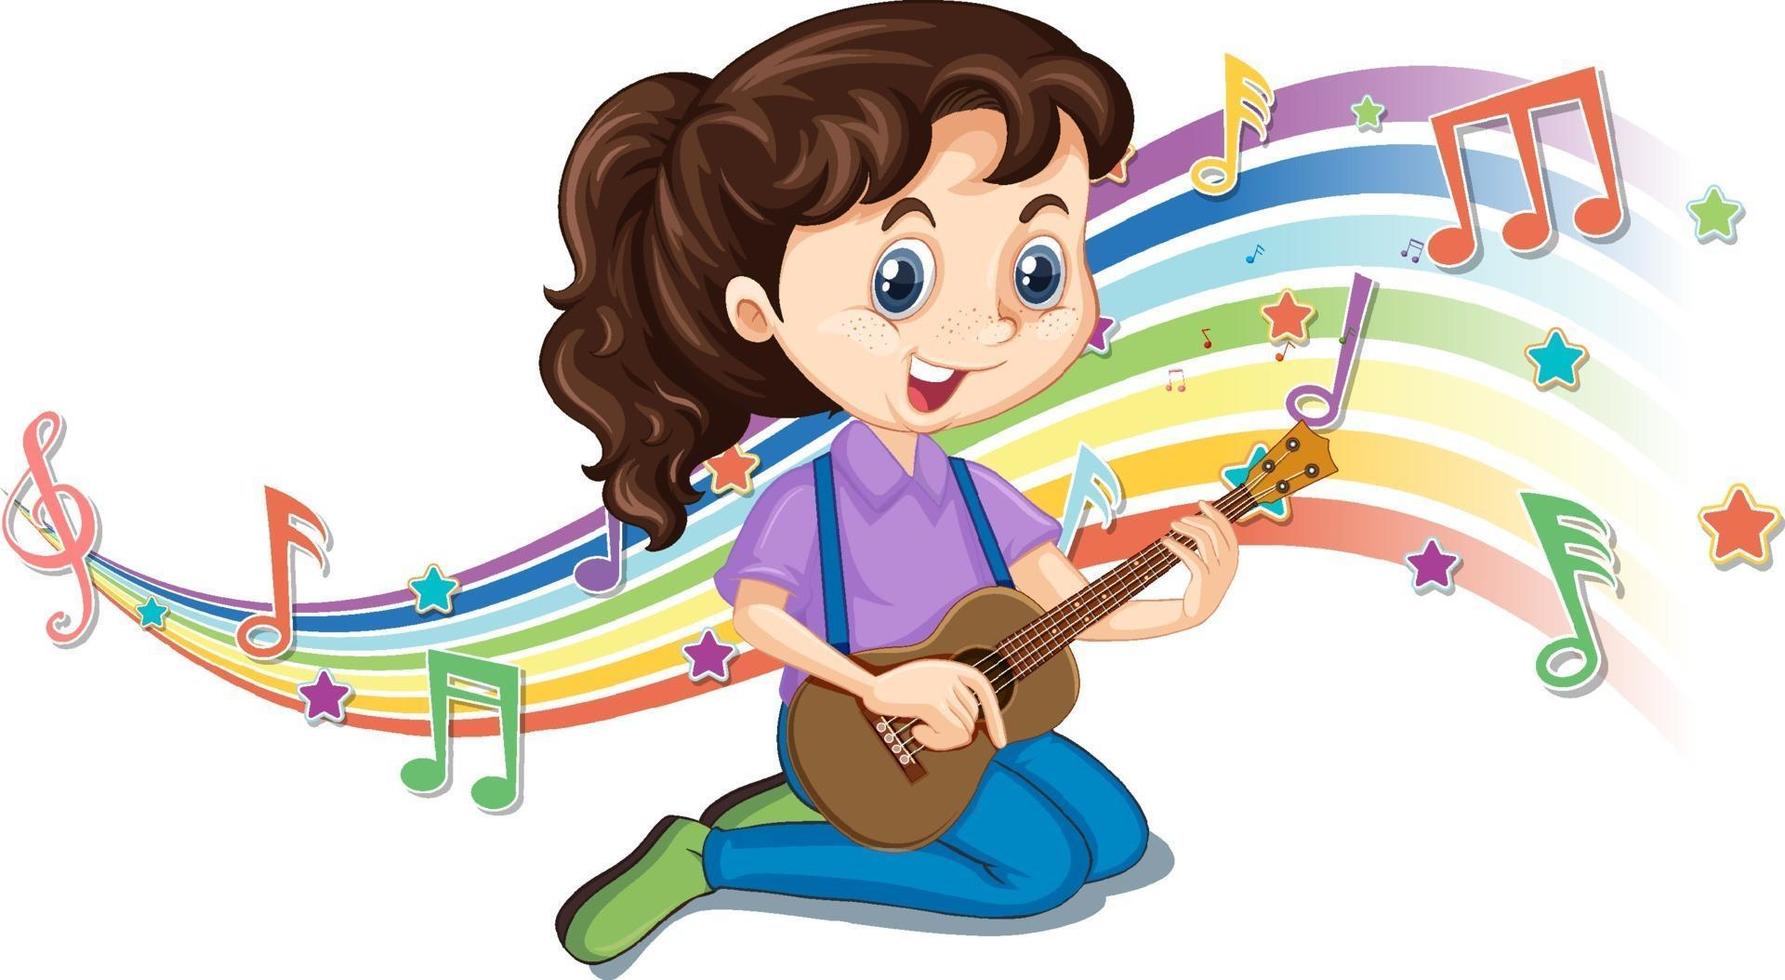 Girl playing guitar with melody symbols on rainbow wave vector